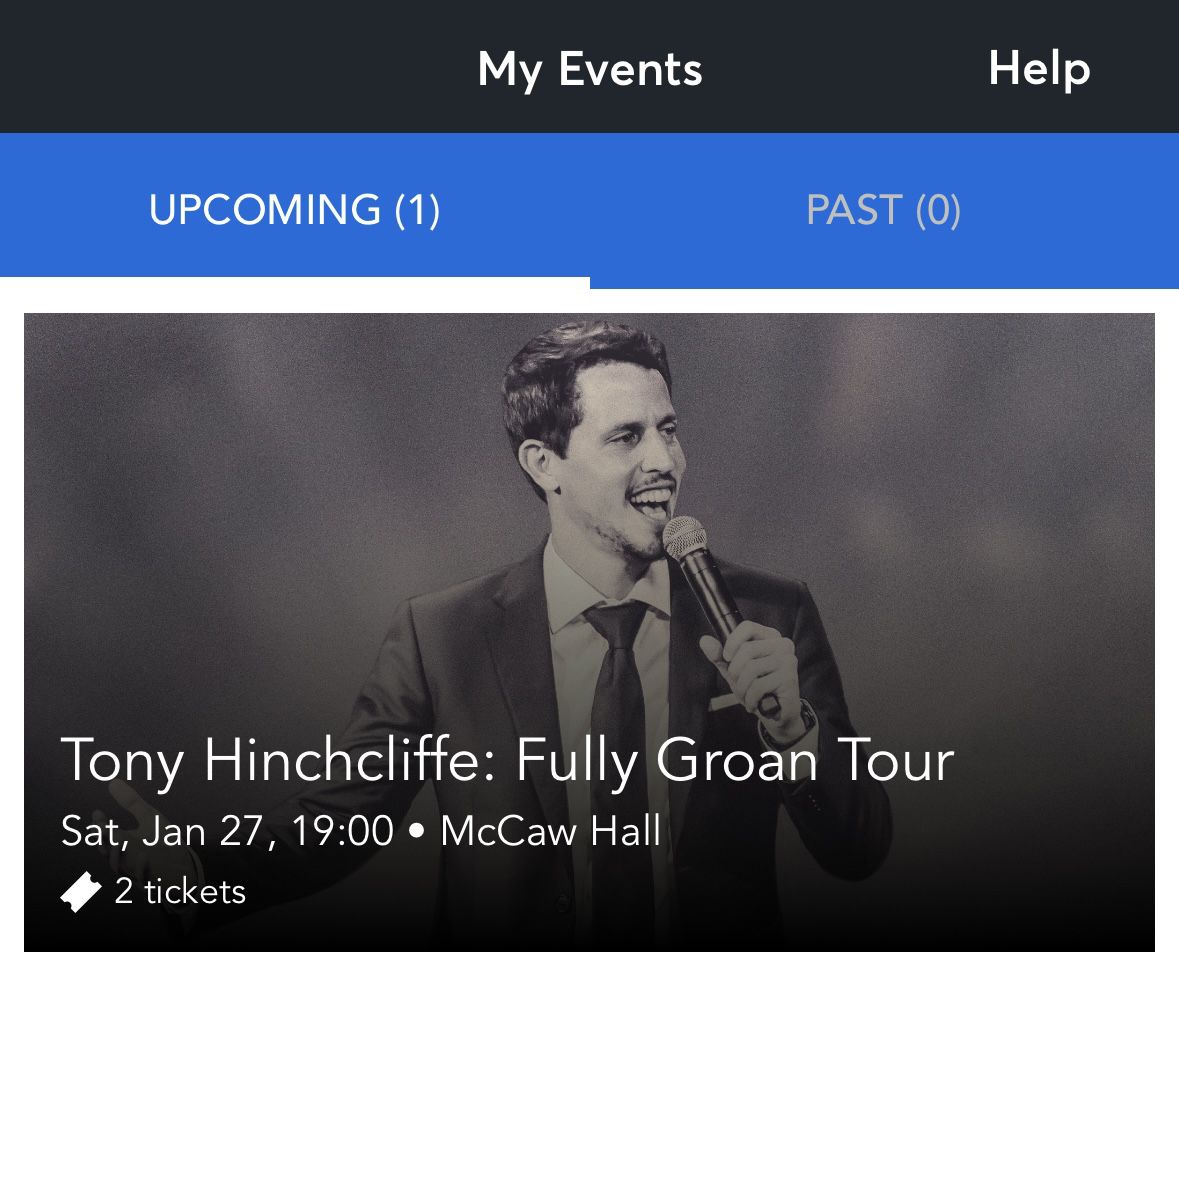 Tony Hinchecliffe Fully Groan Tour